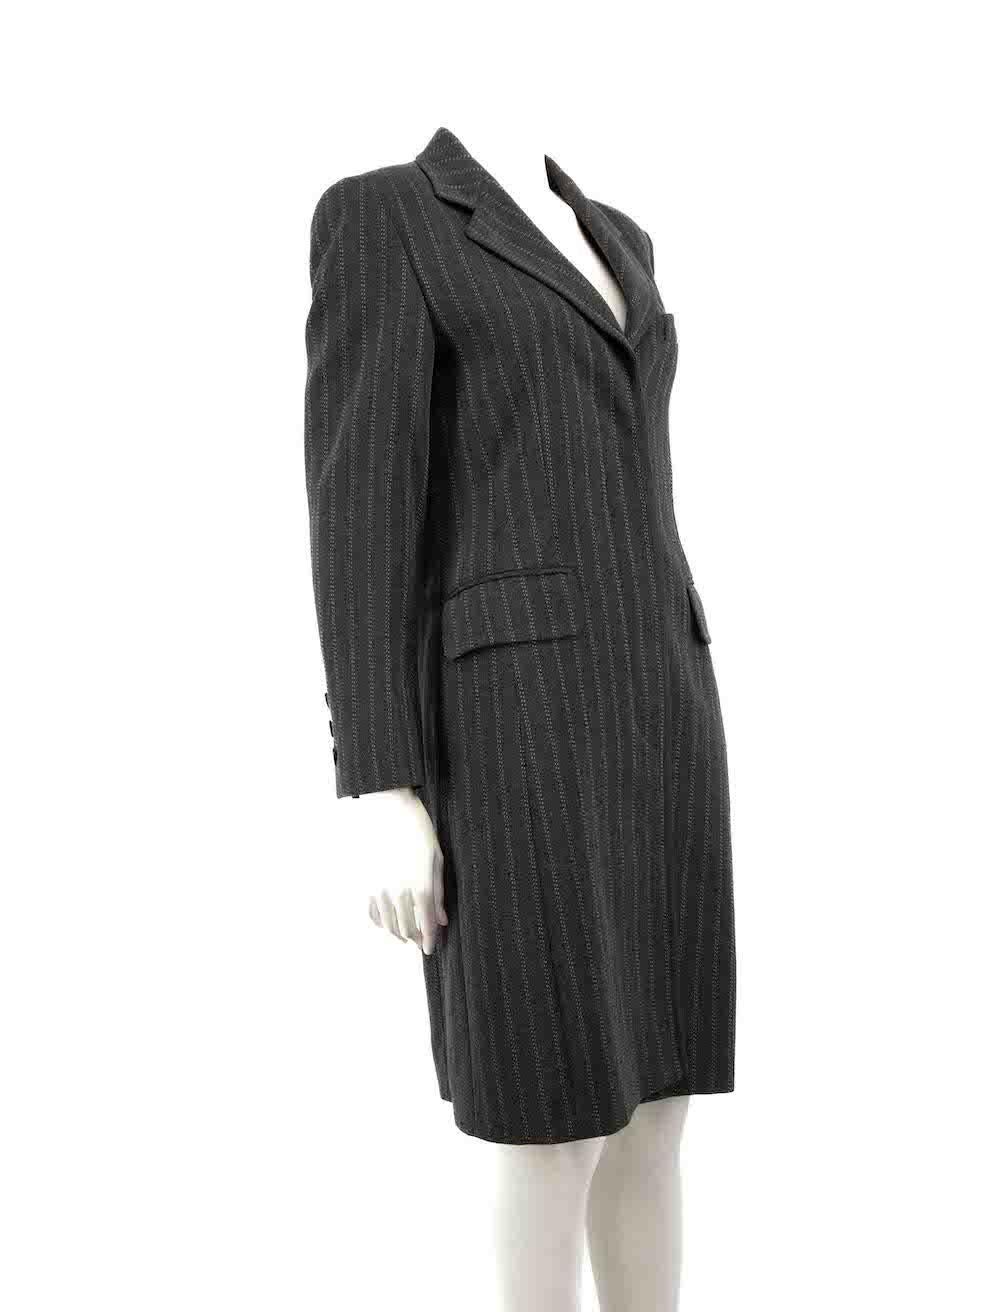 CONDITION is Very good. Minimal wear to jacket is evident. Minimal wear to lining at underarms where the seam has started to pull on this used Escada designer resale item.
 
 
 
 Details
 
 
 Grey
 
 Wool
 
 Coat
 
 Single breasted
 
 Striped